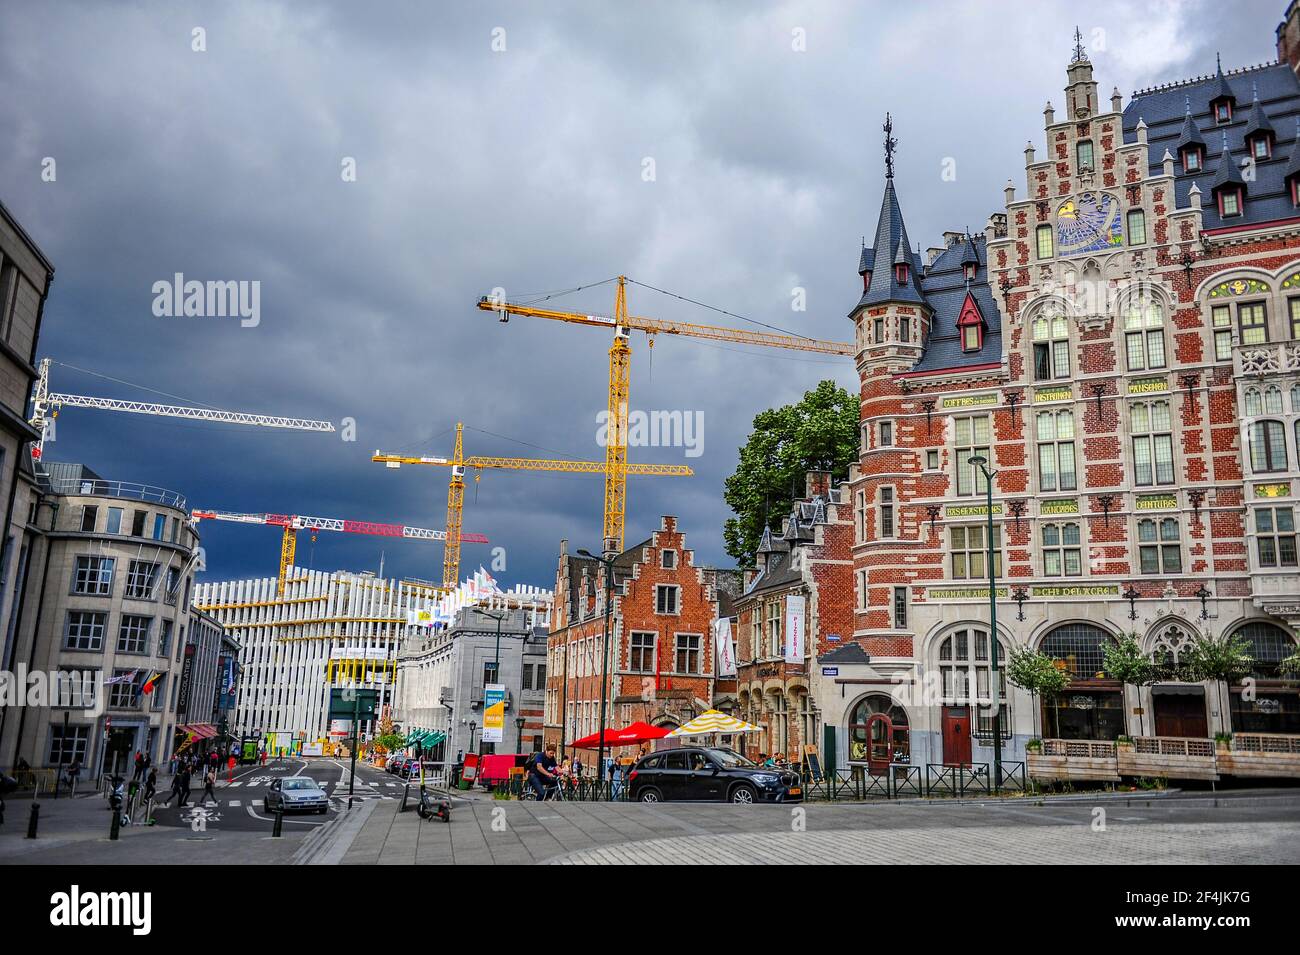 Brussels Old Town - Belgium - 05 17 2019 - Diagonal Facade Of The Mediamarkt  And Inno Shopping Mall In The Rue Neuve, The Main Shopping Street Stock  Photo, Picture and Royalty Free Image. Image 183093290.